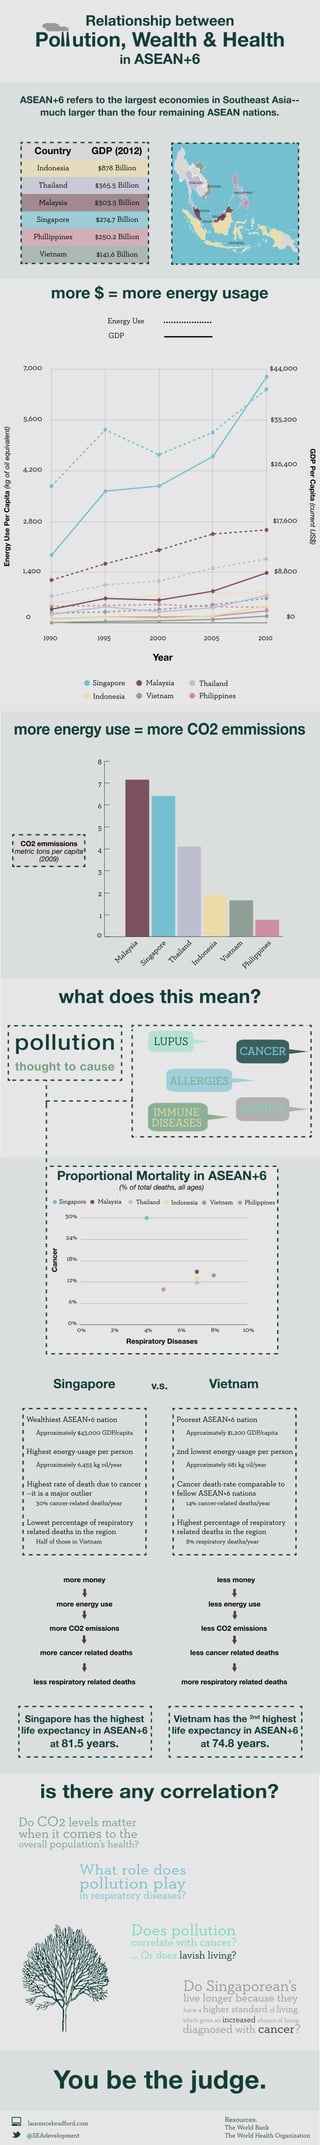 Relationship between

Po ution, Wealth & Health
in ASEAN+6

ASEAN+6 refers to the largest economies in Southeast Asia-much larger than the four remaining ASEAN nations.
Country

GDP (2012)

Indonesia

$878 Billion

Thailand

$365.5 Billion

THAILAND
VIETNAM
PHILLIPPINES

$303.5 Billion

Malaysia

MALAYSIA

Singapore

$274.7 Billion

Phillippines

$250.2 Billion

MALAYSIA
SINGAPORE

INDONESIA

Vietnam

$141.6 Billion

more $ = more energy usage
Energy Use
GDP

$44,000

5,600

$35,200

$26,400

4,200

2,800

$17,600

1,400

GDP Per Capita (current US$)

$8,800

$0

0
1990

1995

2000

2005

2010

Year
Singapore

Malaysia

Thailand

Indonesia

Vietnam

Philippines

more energy use = more CO2 emmissions
8
7
6
5
CO2 emmissions
metric tons per capita
(2009)

4
3
2
1

ne
s
lip
pi

Ph
i

In
do
ne

Th
ai

Vi
et
na
m

sia

nd
la

re
ga
po

Si
n

M
al

ay
sia

0

what does this mean?

pollution

LUPUS

thought to cause

CANCER

ALLERGIES
ASTHMA

IMMUNE
DISEASES

Proportional Mortality in ASEAN+6
(% of total deaths, all ages)

Singapore

Malaysia

Thailand

Vietnam

Philippines

8%

Indonesia

10%

30%
24%

Cancer

Energy Use Per Capita (kg of oil equivalent)

7,000

18%
12%
6%
0%

0%

2%

4%

6%

Respiratory Diseases

Singapore

Vietnam

v.s.

Poorest ASEAN+6 nation

Wealthiest ASEAN+6 nation
Approximately $43,000 GDP/capita

Highest energy-usage per person

Approximately $1,200 GDP/capita

2nd lowest energy-usage per person

Approximately 6,455 kg oil/year

Approximately 681 kg oil/year

Highest rate of death due to cancer
--it is a major outlier

Cancer death-rate comparable to
fellow ASEAN+6 nations

30% cancer-related deaths/year

14% cancer-related deaths/year

Lowest percentage of respiratory
related deaths in the region

Highest percentage of respiratory
related deaths in the region

Half of those in Vietnam

8% respiratory deaths/year

more money

less money

more energy use

less energy use

more CO2 emissions

less CO2 emissions

more cancer related deaths

less cancer related deaths

less respiratory related deaths

more respiratory related deaths

Singapore has the highest
life expectancy in ASEAN+6
at 81.5 years.

Vietnam has the 2nd highest
life expectancy in ASEAN+6
at 74.8 years.

is there any correlation?
Do CO2 levels matter
when it comes to the

overall population’s health?

What role does

pollution play

in respiratory diseases?

Does pollution

correlate with cancer?
... Or does lavish living?

Do Singaporean’s

live longer because they
have a higher

standard of living,

which gives an increased chance of being

diagnosed with cancer?

You be the judge.
laurencebradford.com
@SEAdevelopment

Resources:

The World Bank
The World Health Organization

 